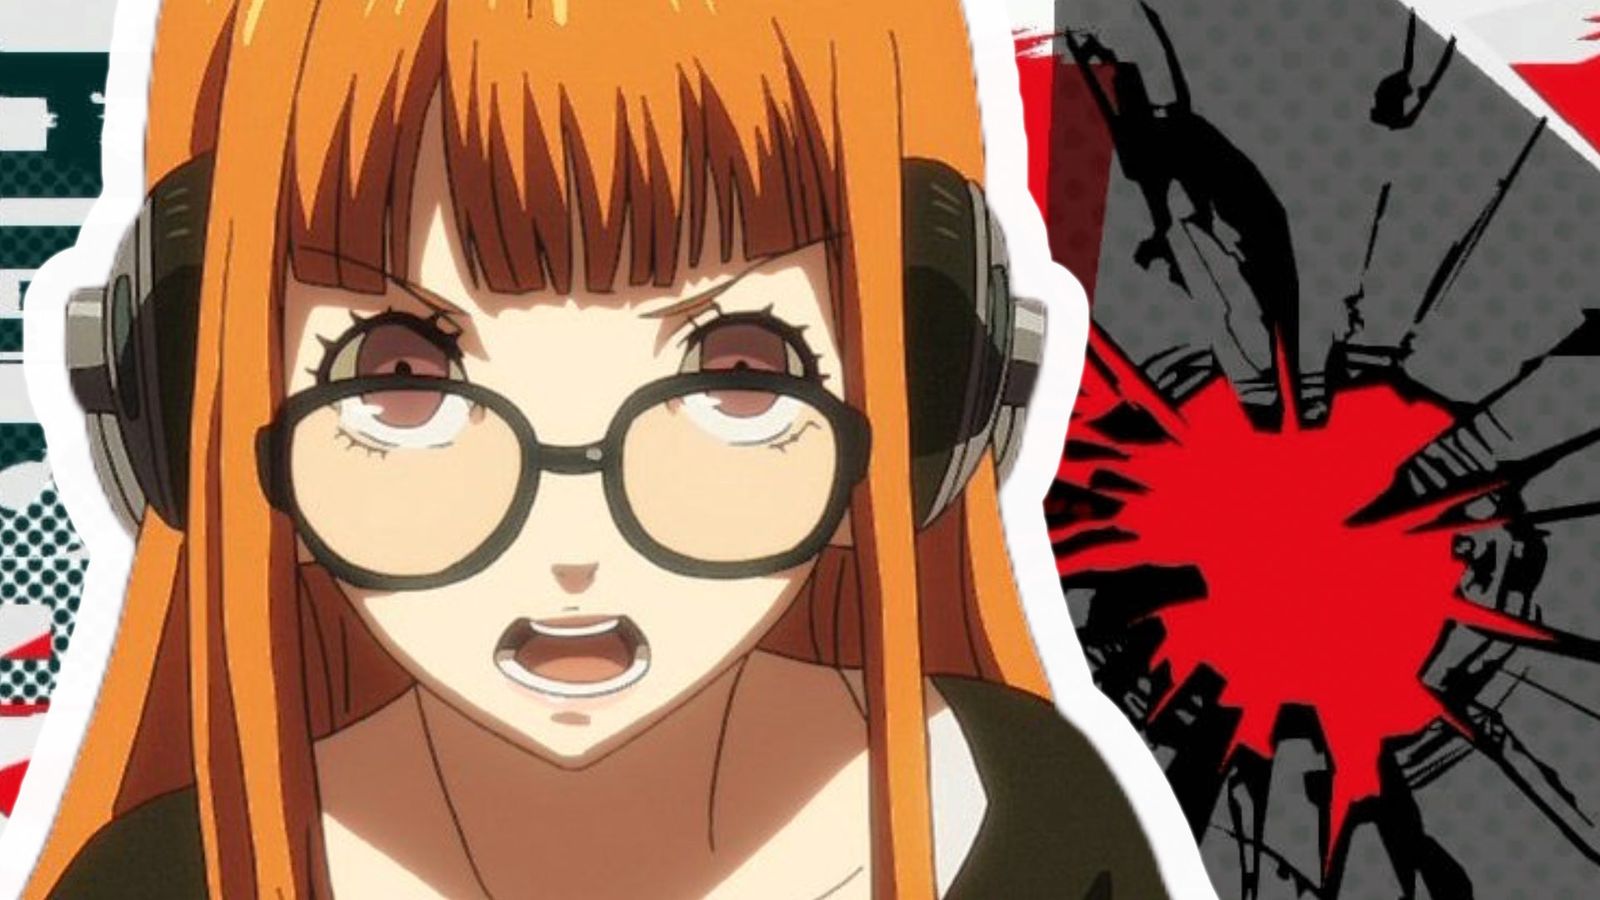 Persona 5 voice actress leaves social media after AI techbros steal her voice  